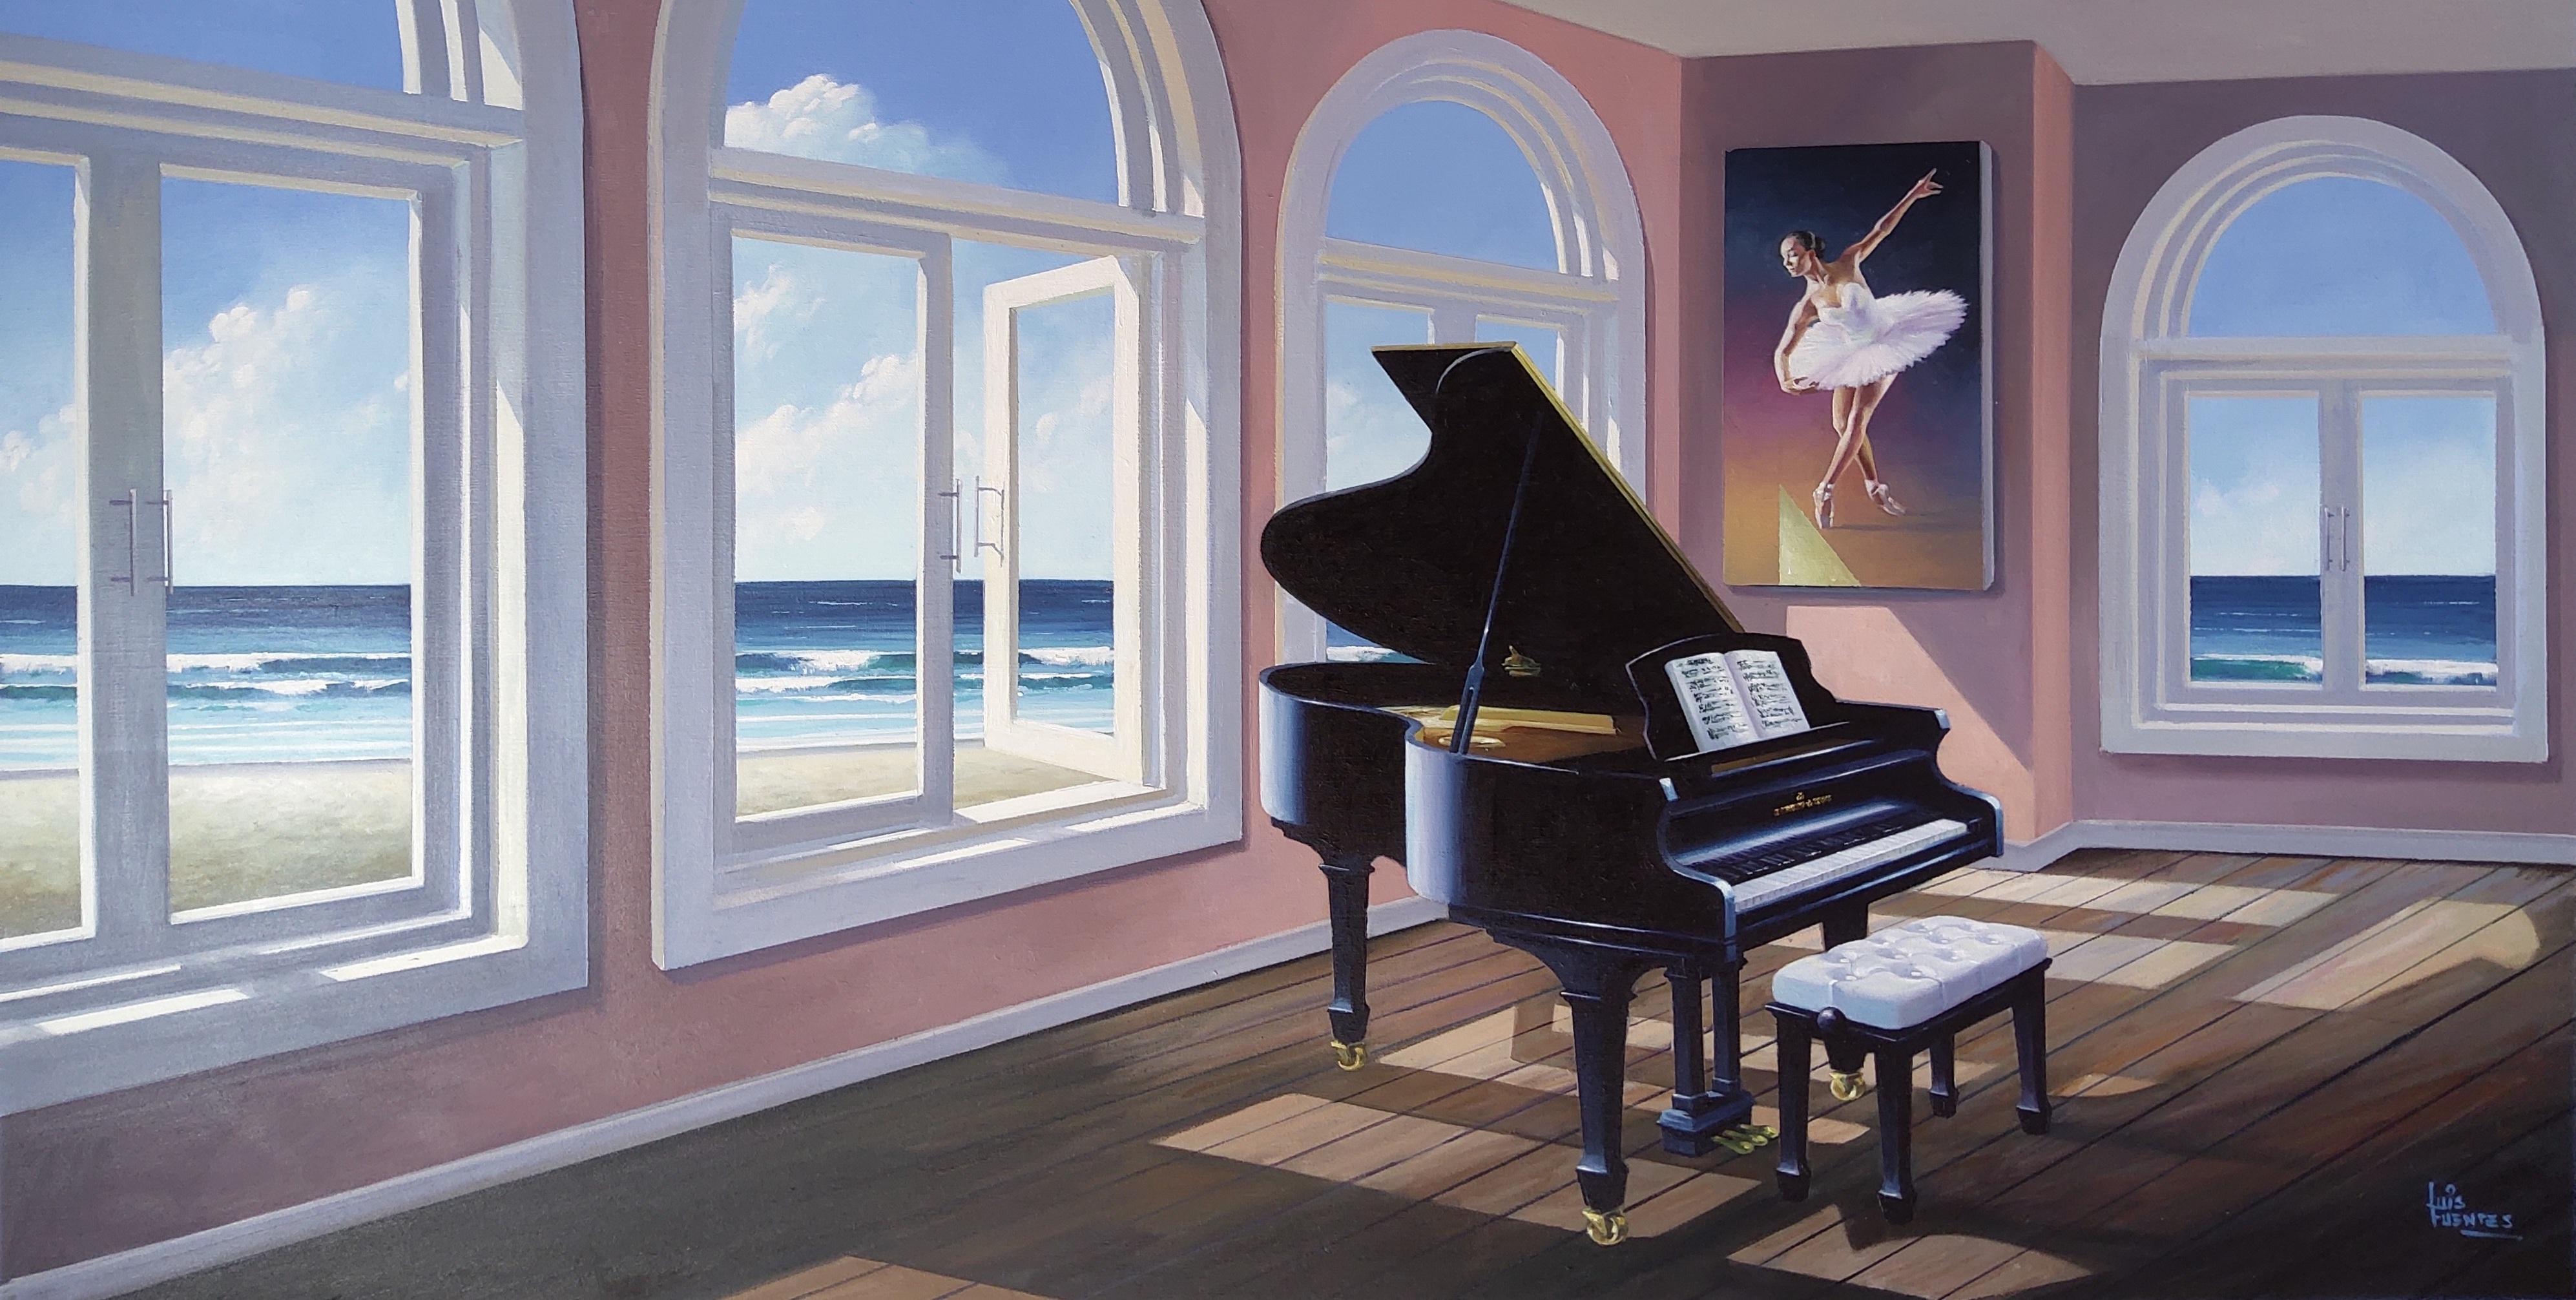 Luis Fuentes Still-Life Painting - Symphony by the Sea - Surrealist realism modern interior artwork oil painting